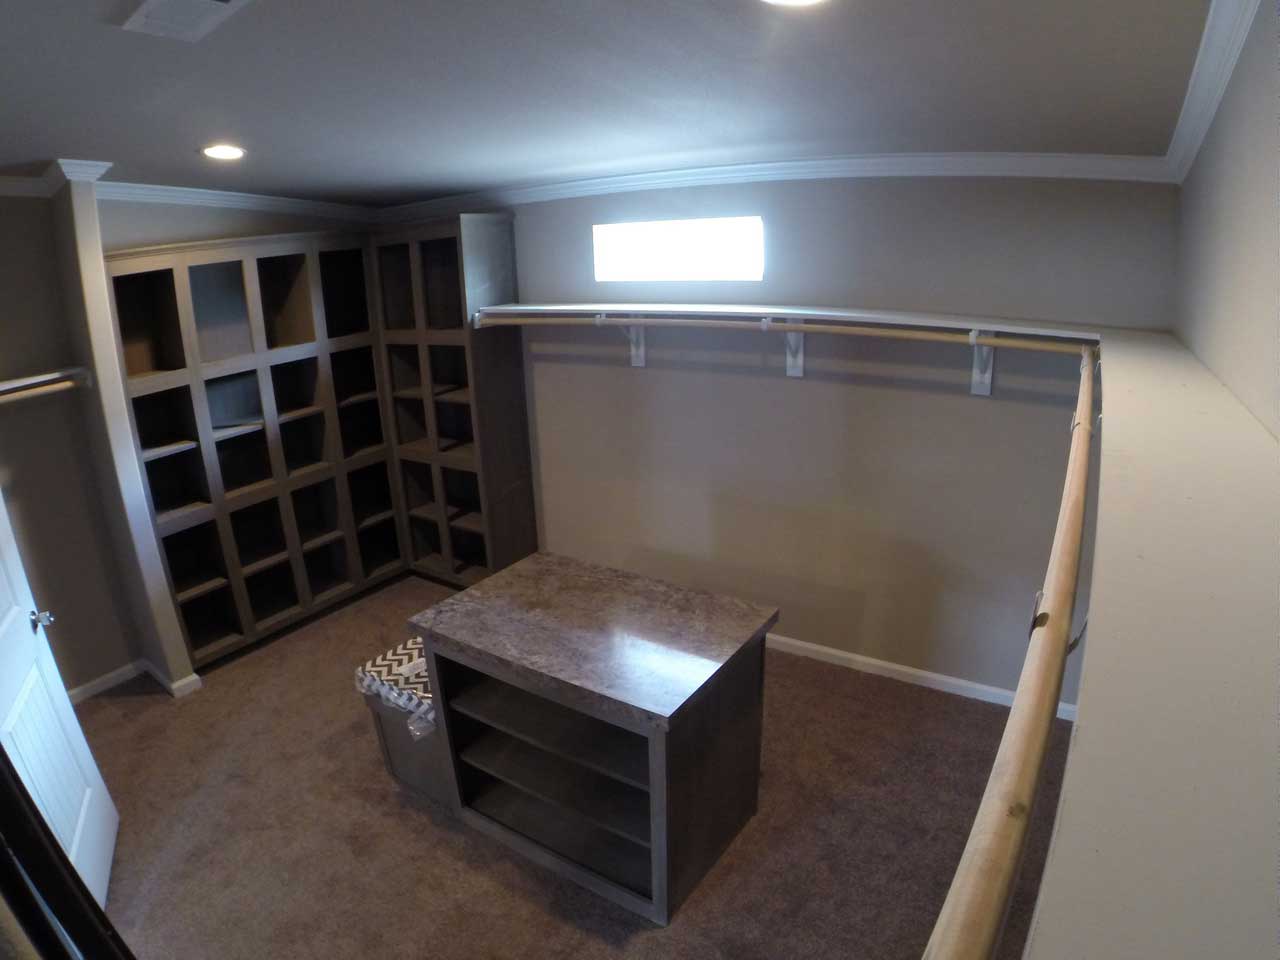 A spacious walk-in closet with ample shelving and a cabinet for organizing and storing personal belongings.